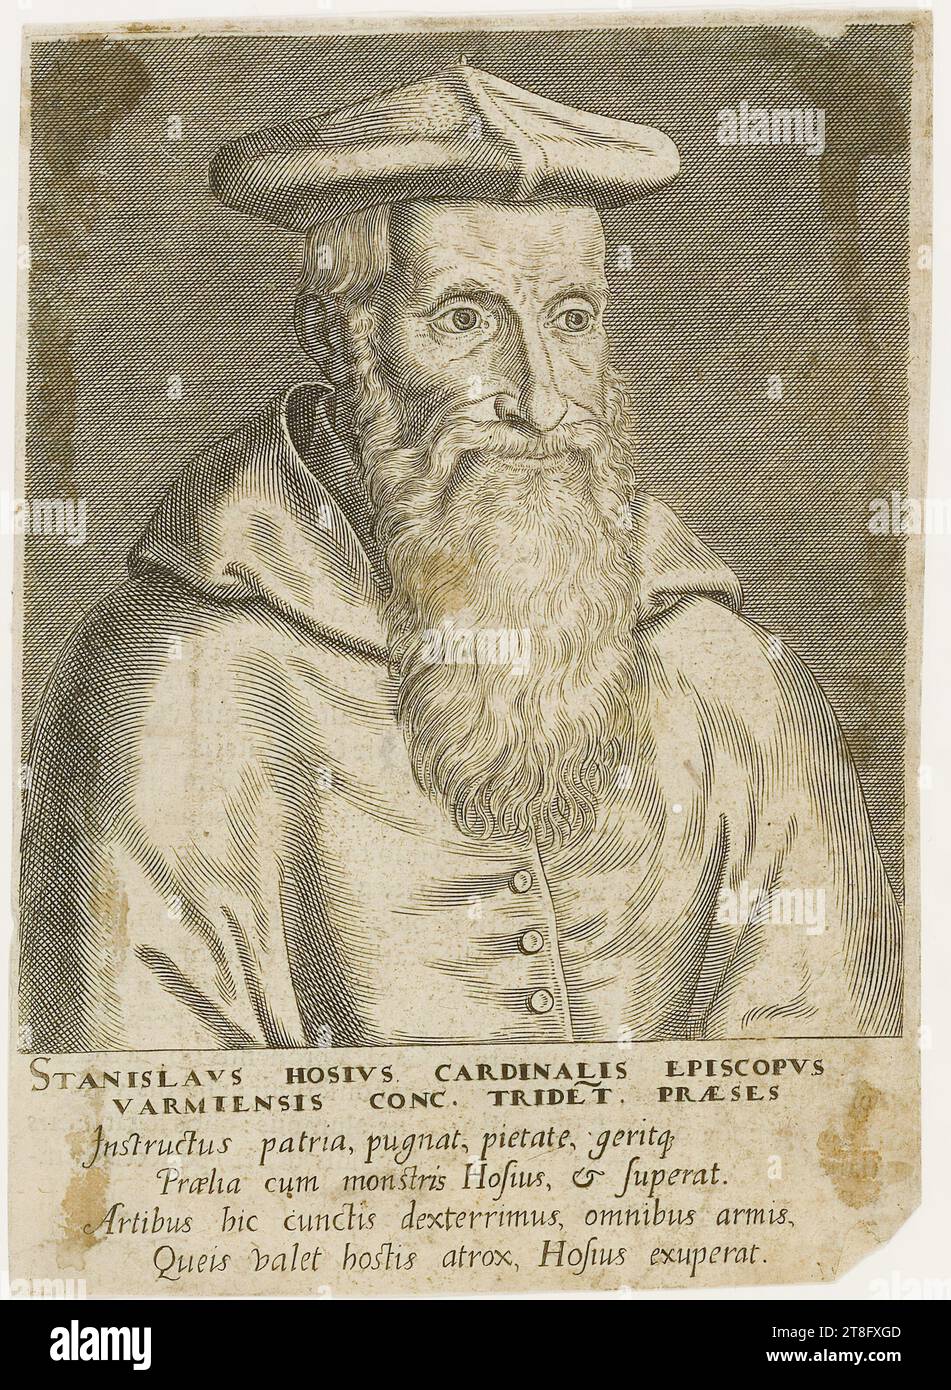 reverse printed. STANISLAV HOSIVUS CARDINAL BISHOP, VARMIENSIS CONC. THREE PRESIDENT, trained by his country, he fights, with piety, conducts..., Prélia with the monsters Hosius, and overcomes, with the arts here we all dexterous, with all the weapons, Whose valorous enemy the terrible, Hosius has taken Stock Photo